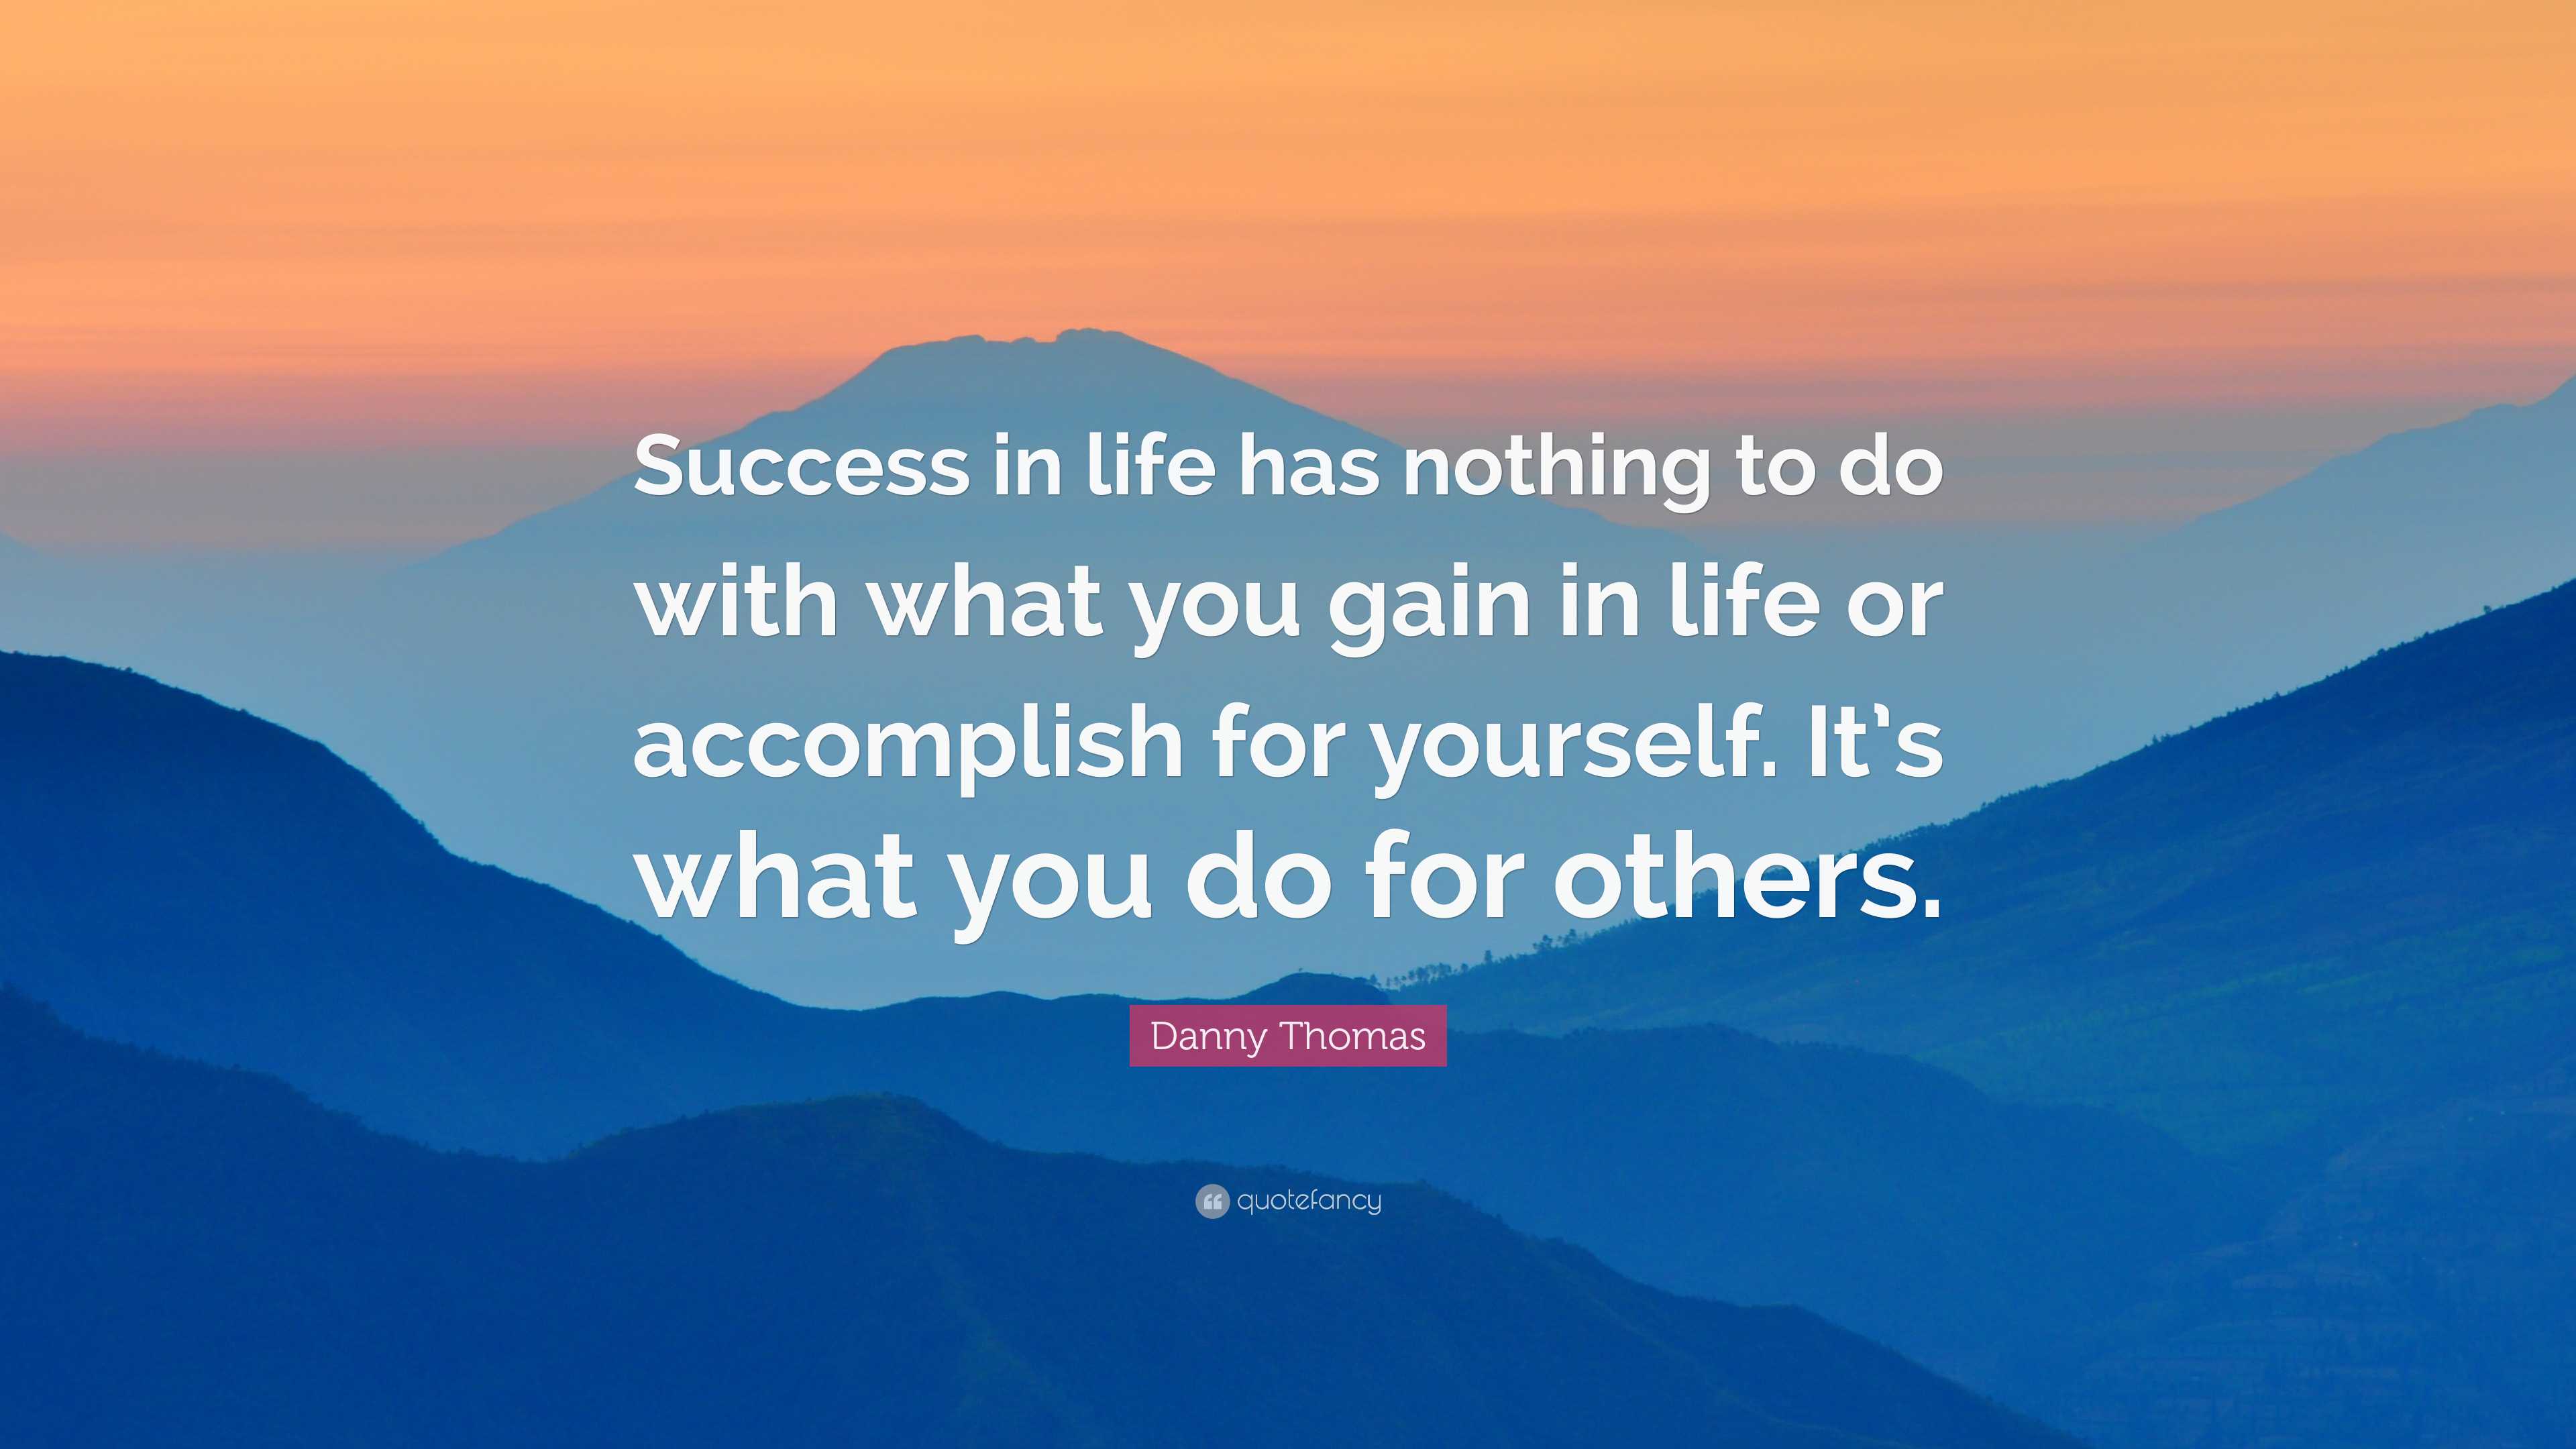 Danny Thomas Quote: “Success in life has nothing to do with what you ...